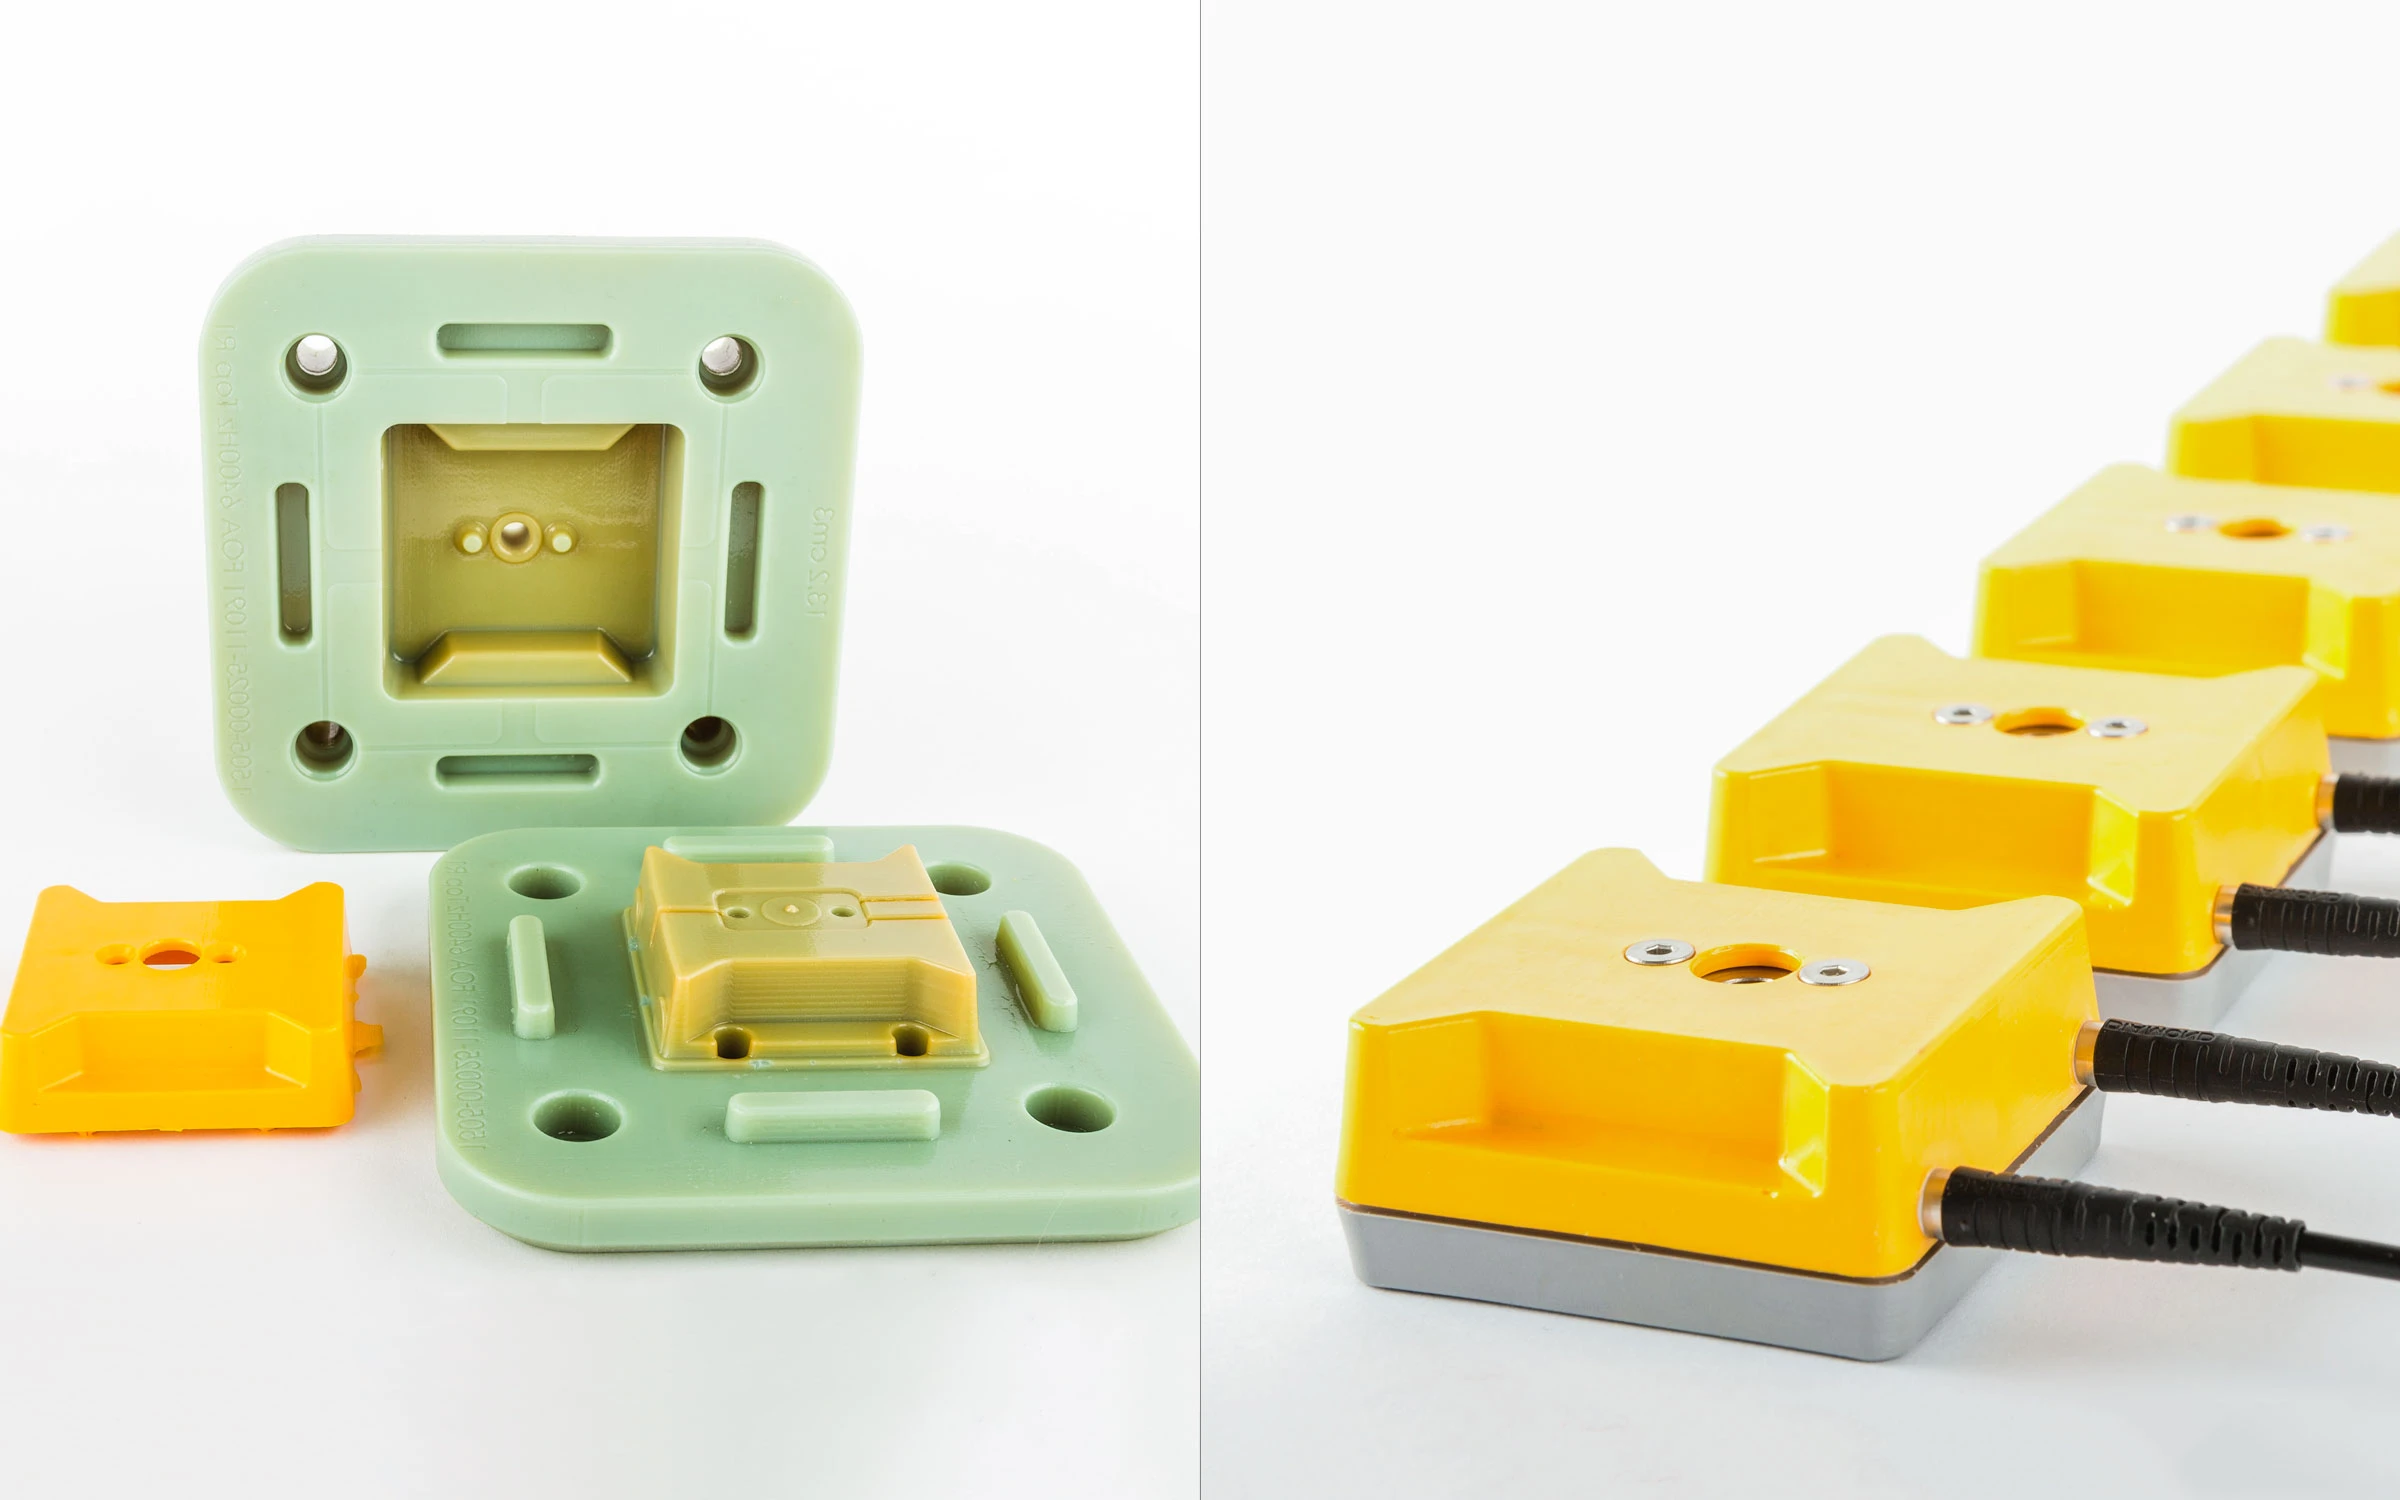 Plastic-injection-3D-printing-mold